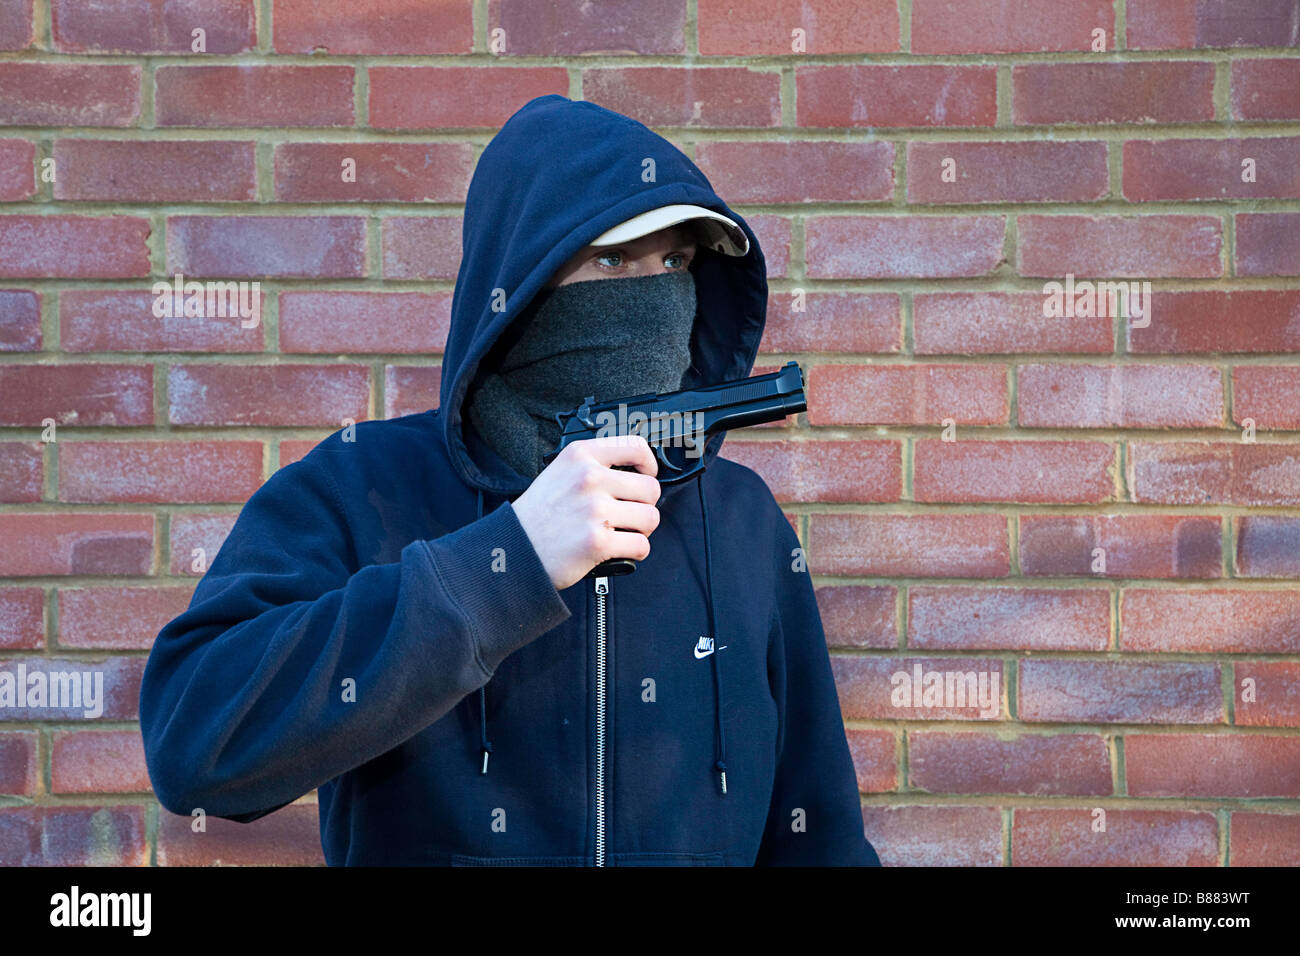 Gang Gun Crime - Hooded Masked Teenager Proudly Shows Off His Beretta 92 Pistol Stock Photo